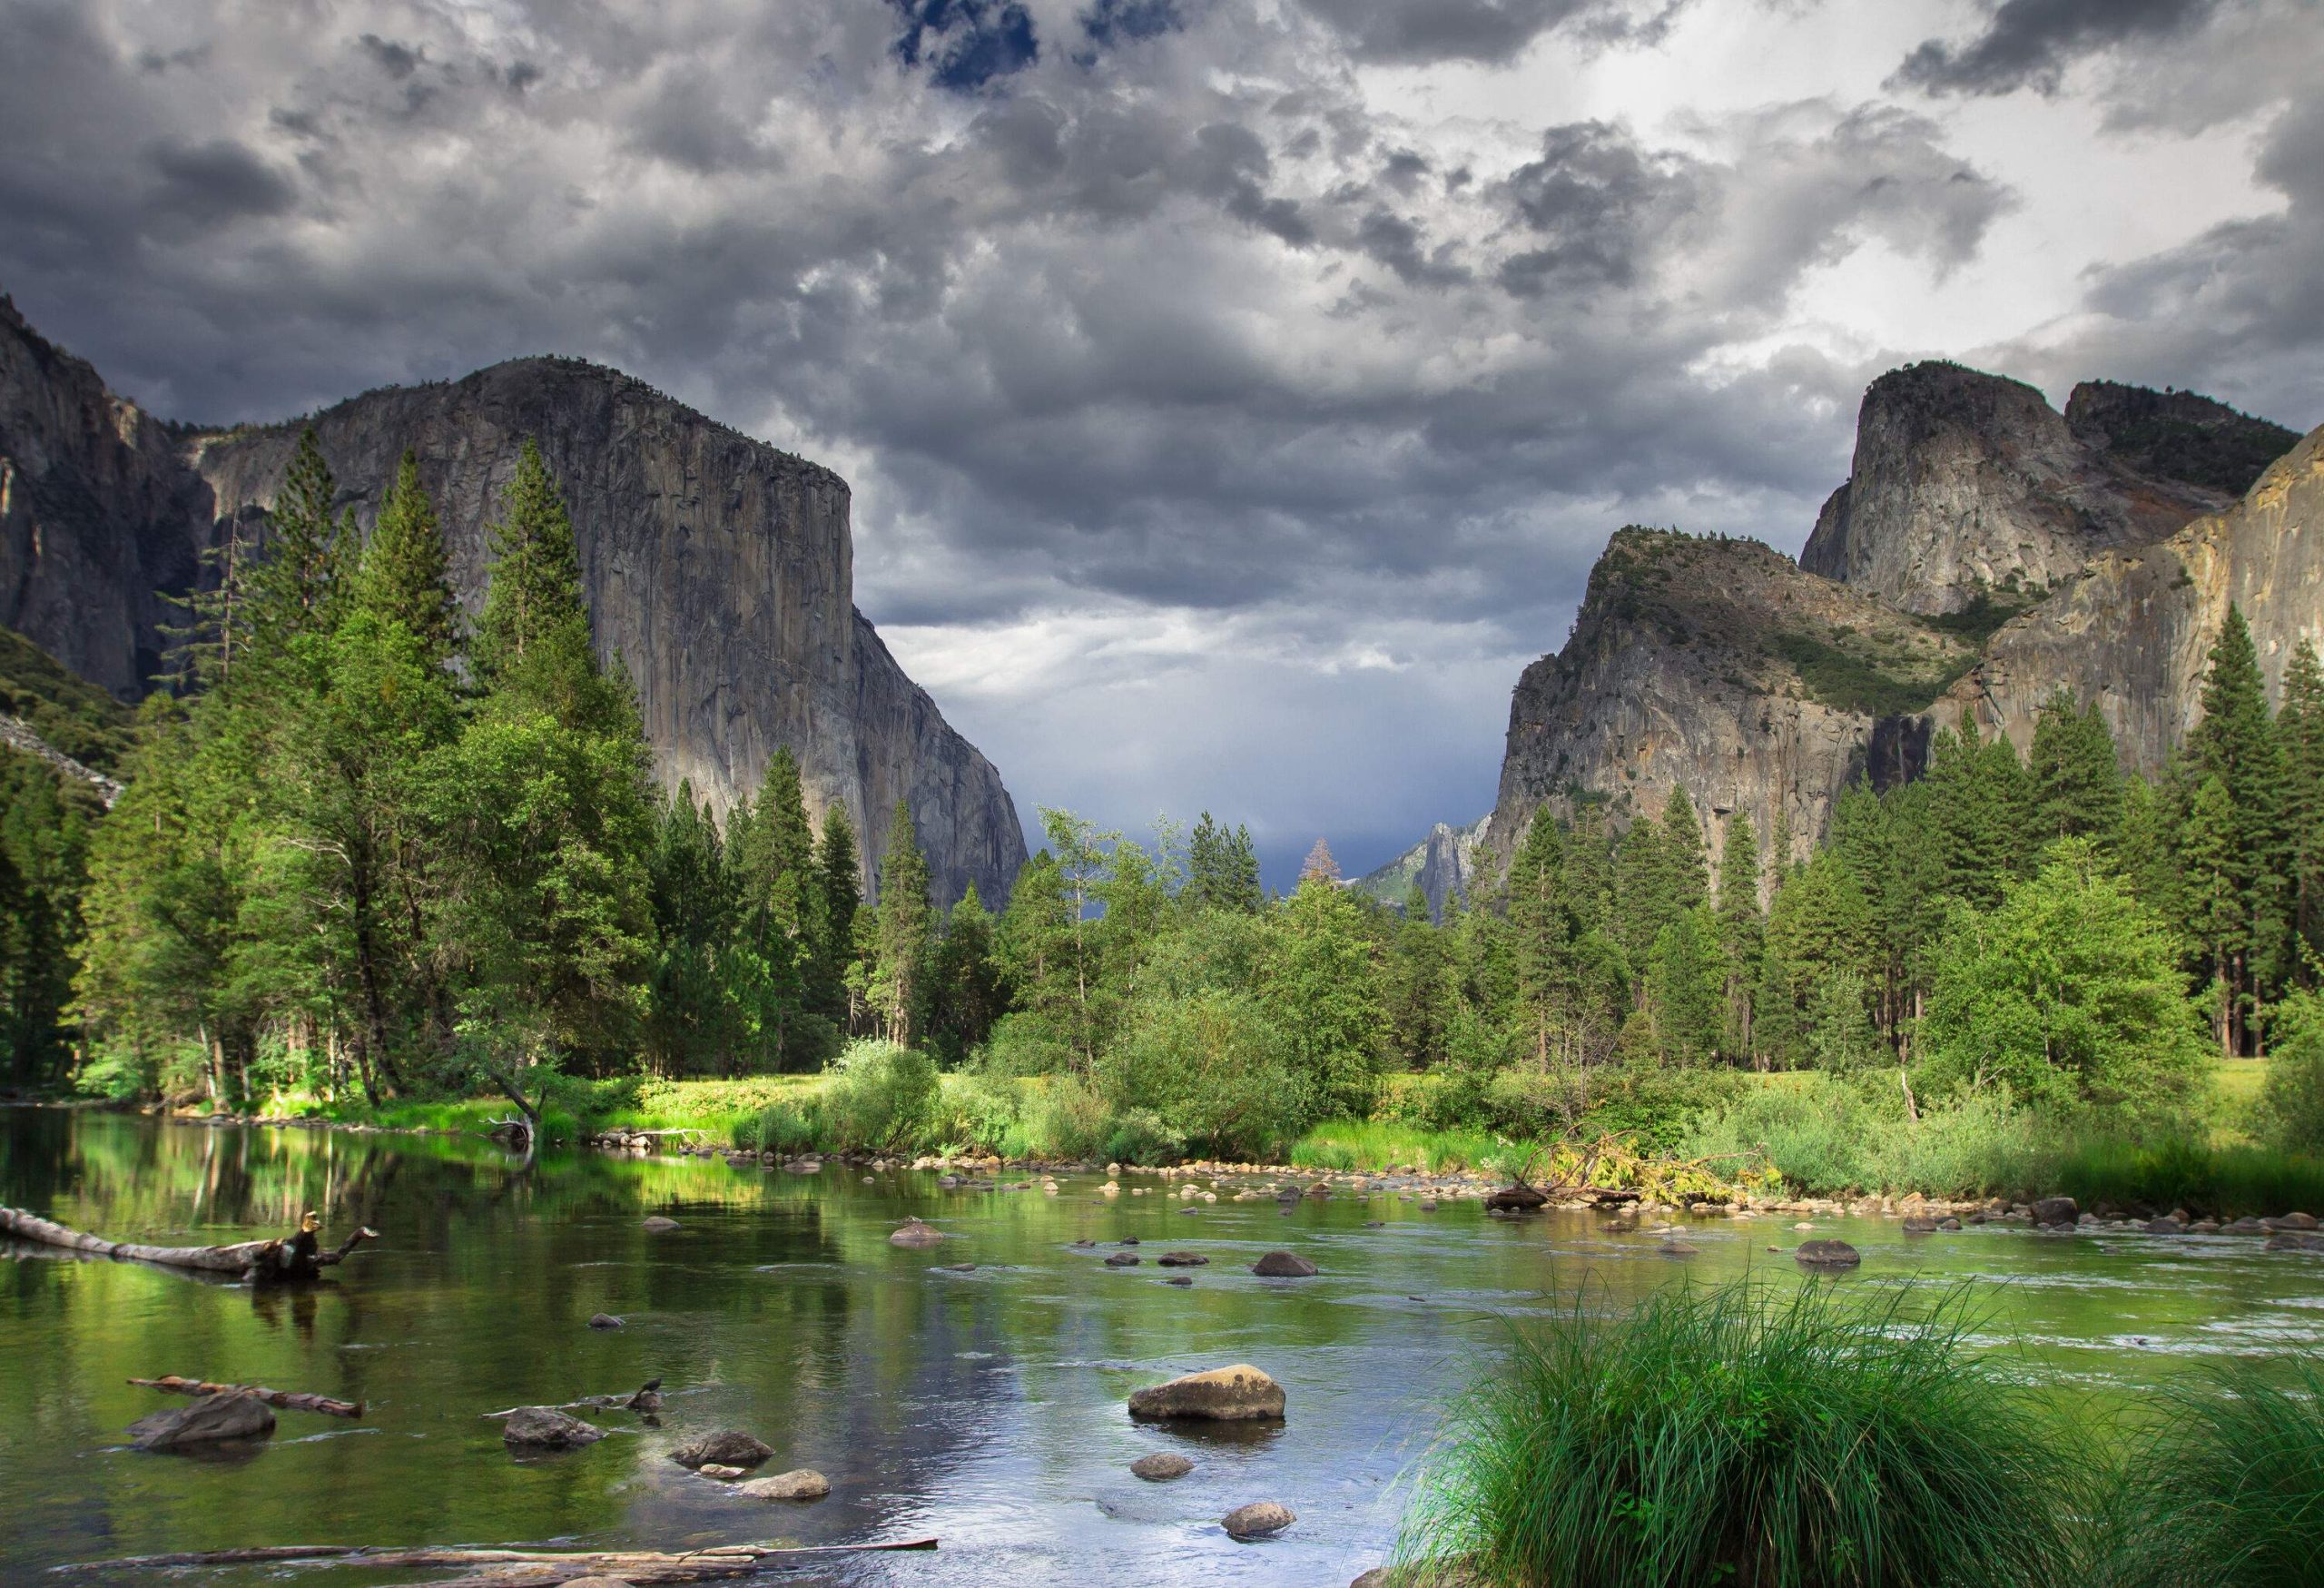 The iconic granite towering rock mountains protrude against an overcast sky along the lush river bank.